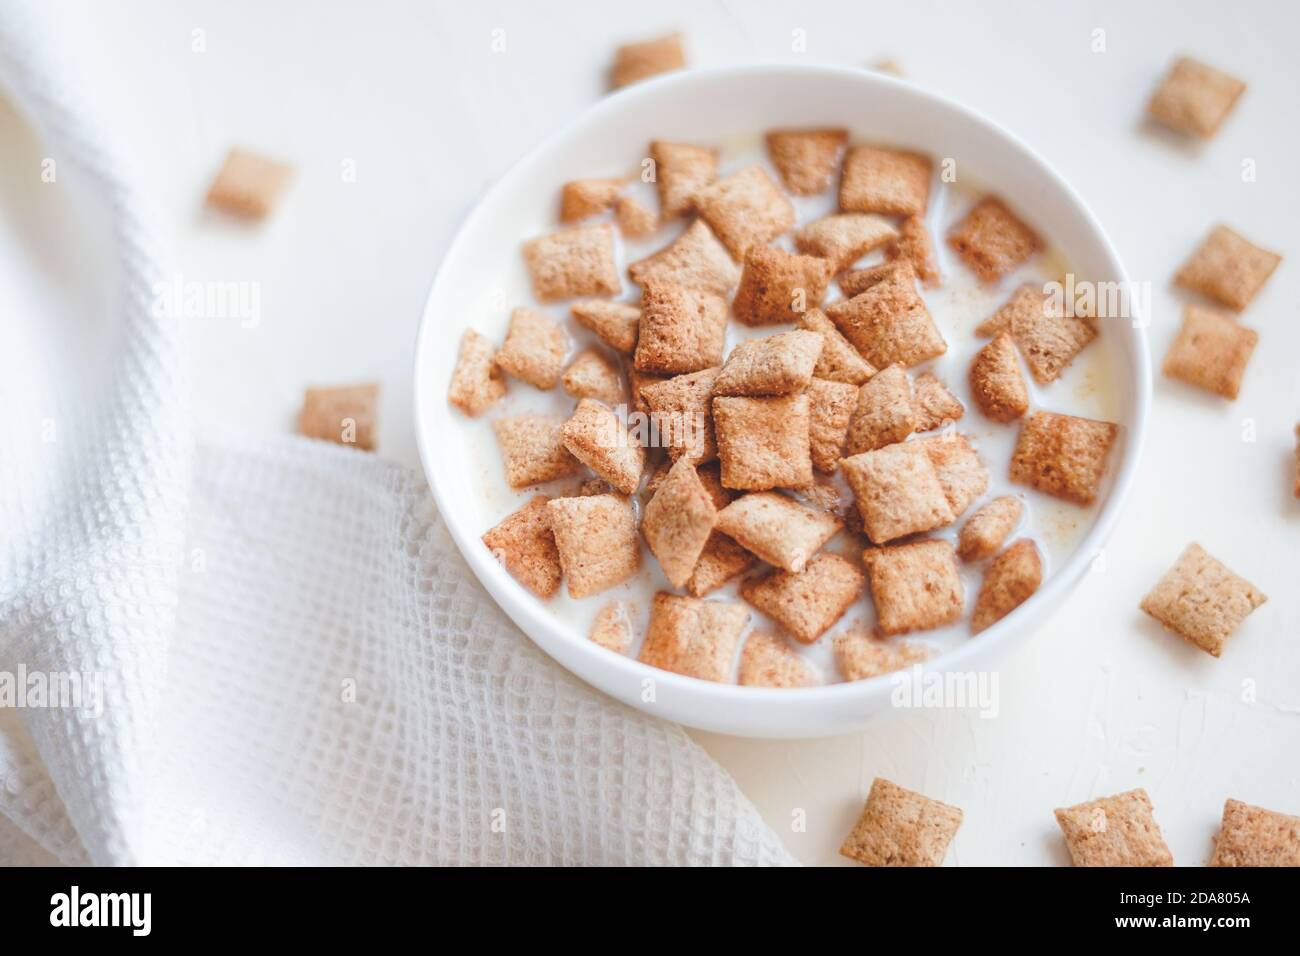 Dry breakfast cereal pads with milk on a white concrete background  Stock Photo